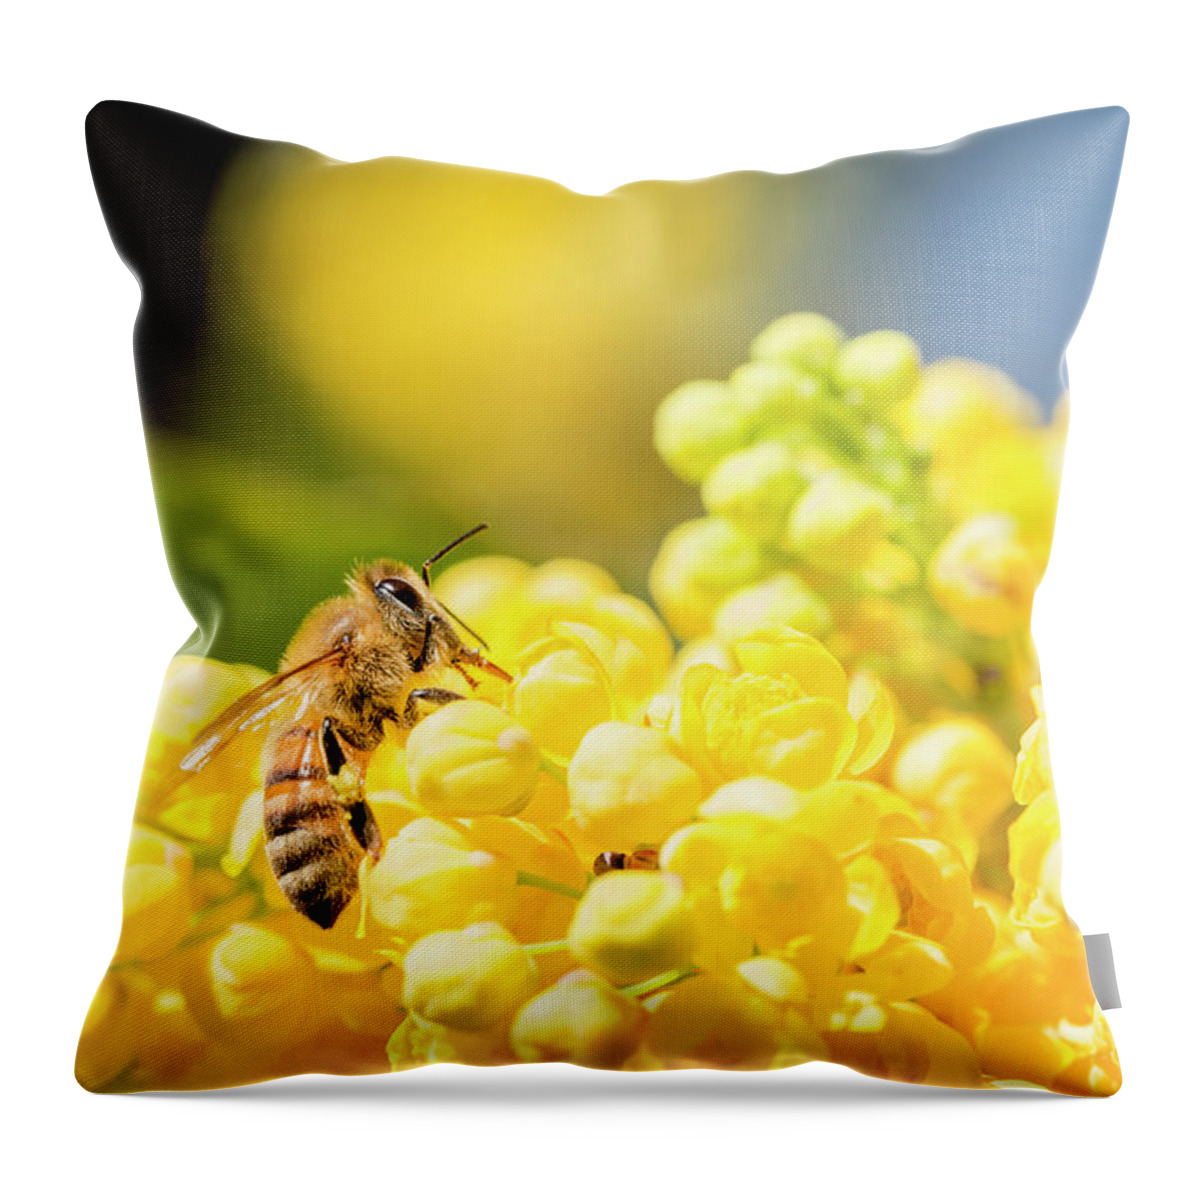 Environmental Conservation Throw Pillow featuring the photograph Honeybee by Mauro grigollo